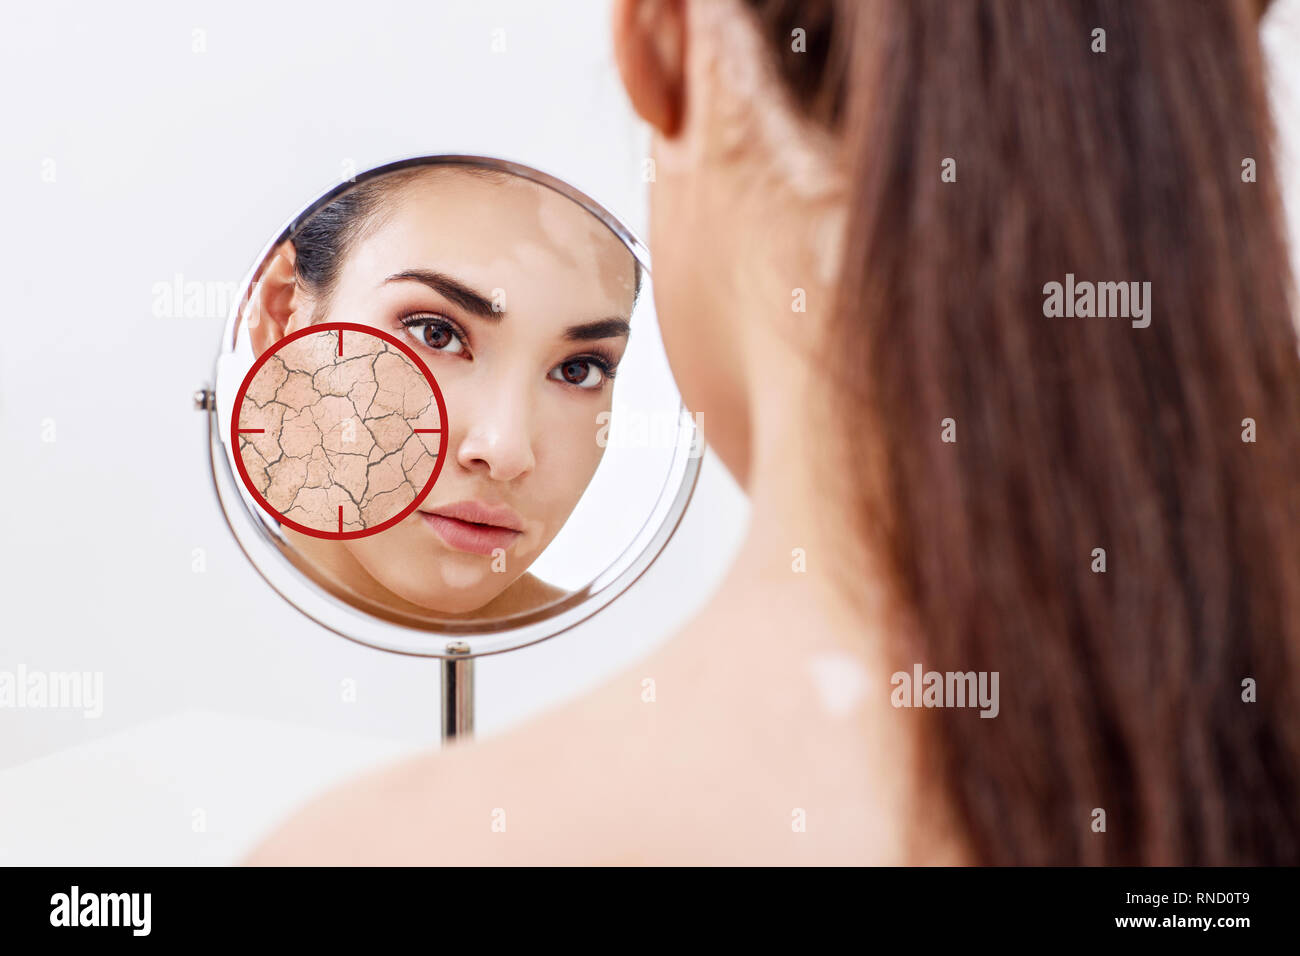 Red aim shows dry facial skin before moistening. Stock Photo